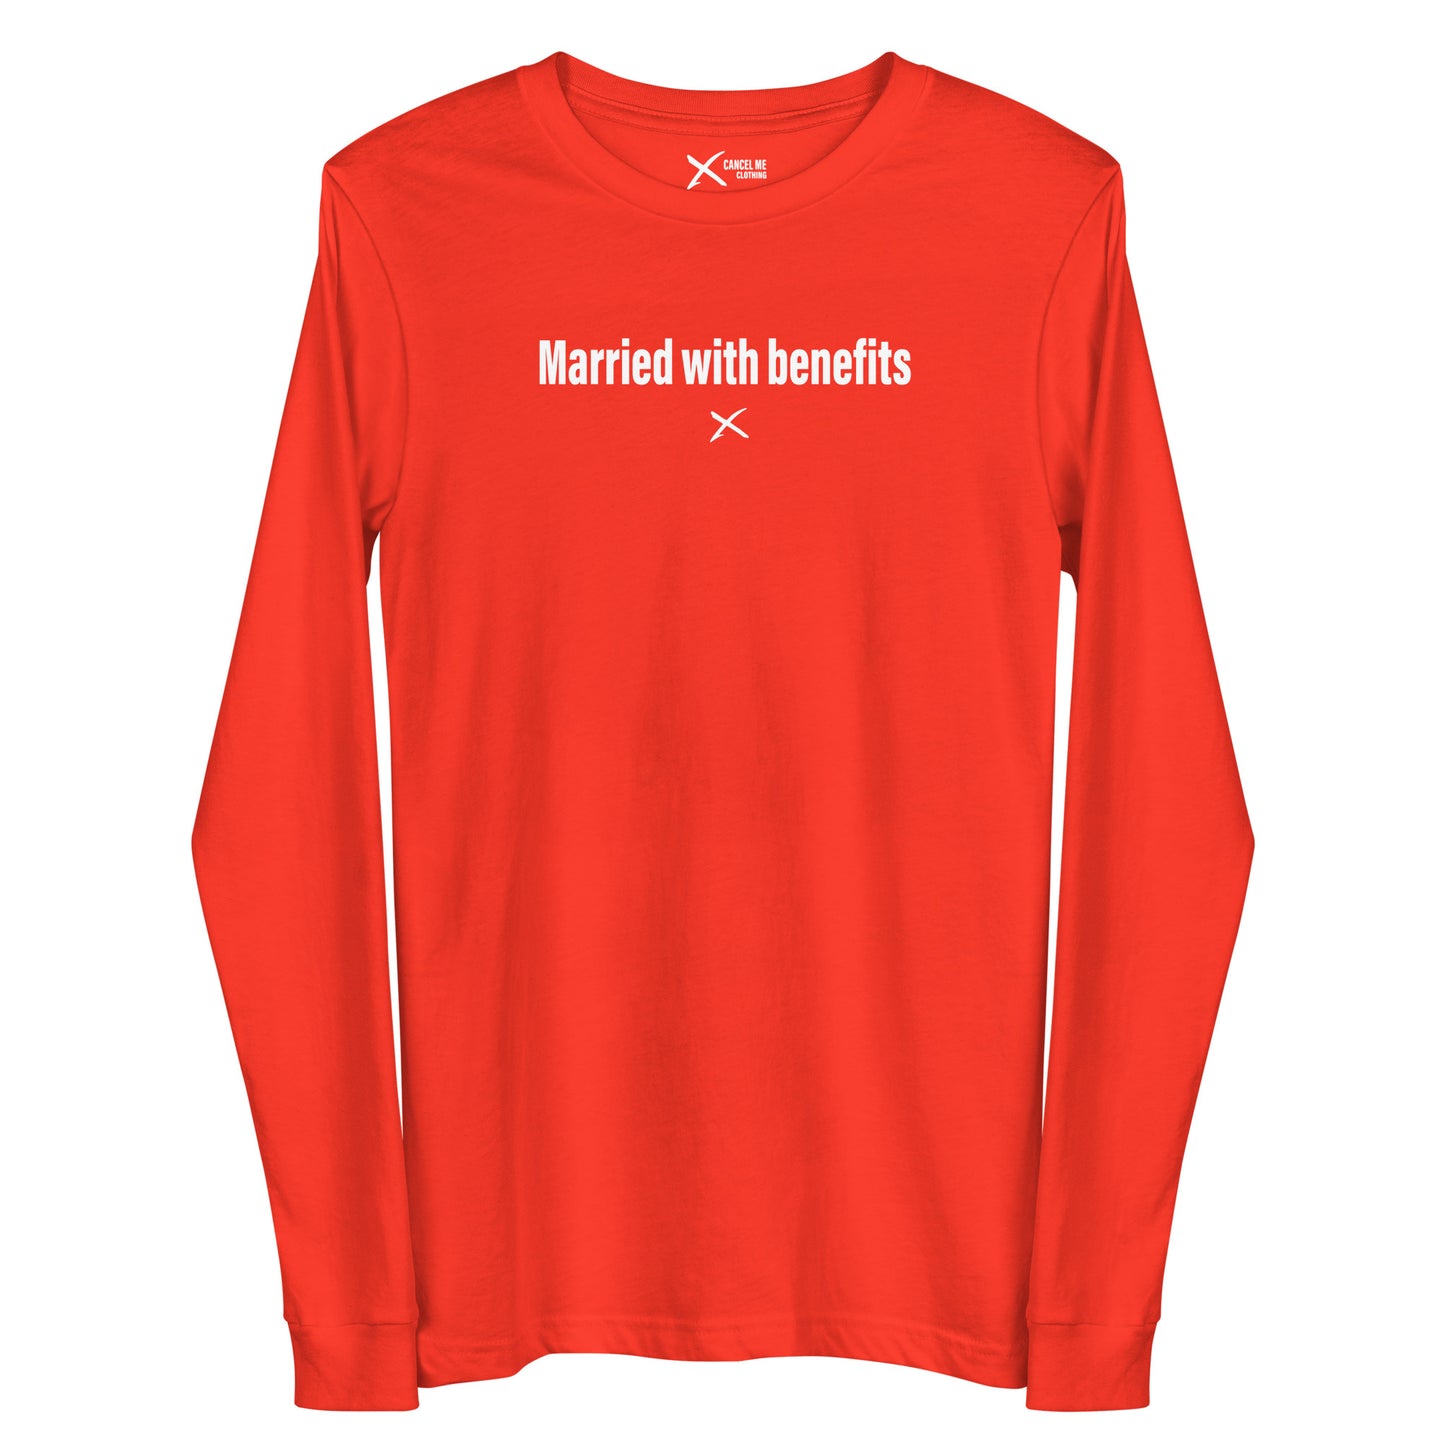 Married with benefits - Longsleeve